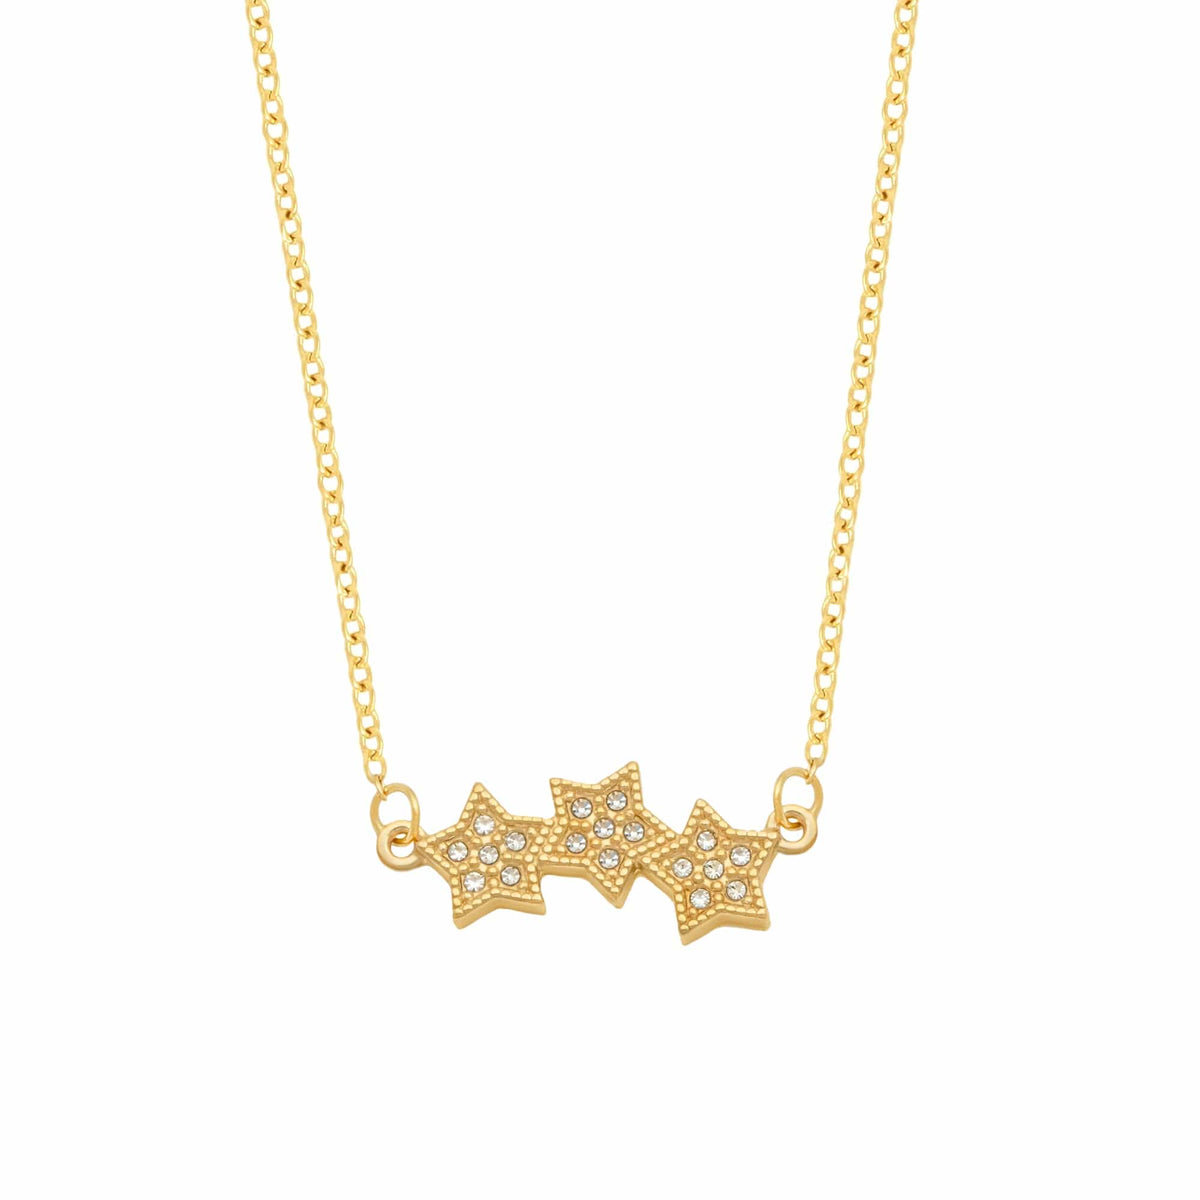 BohoMoon Stainless Steel Space Necklace Gold